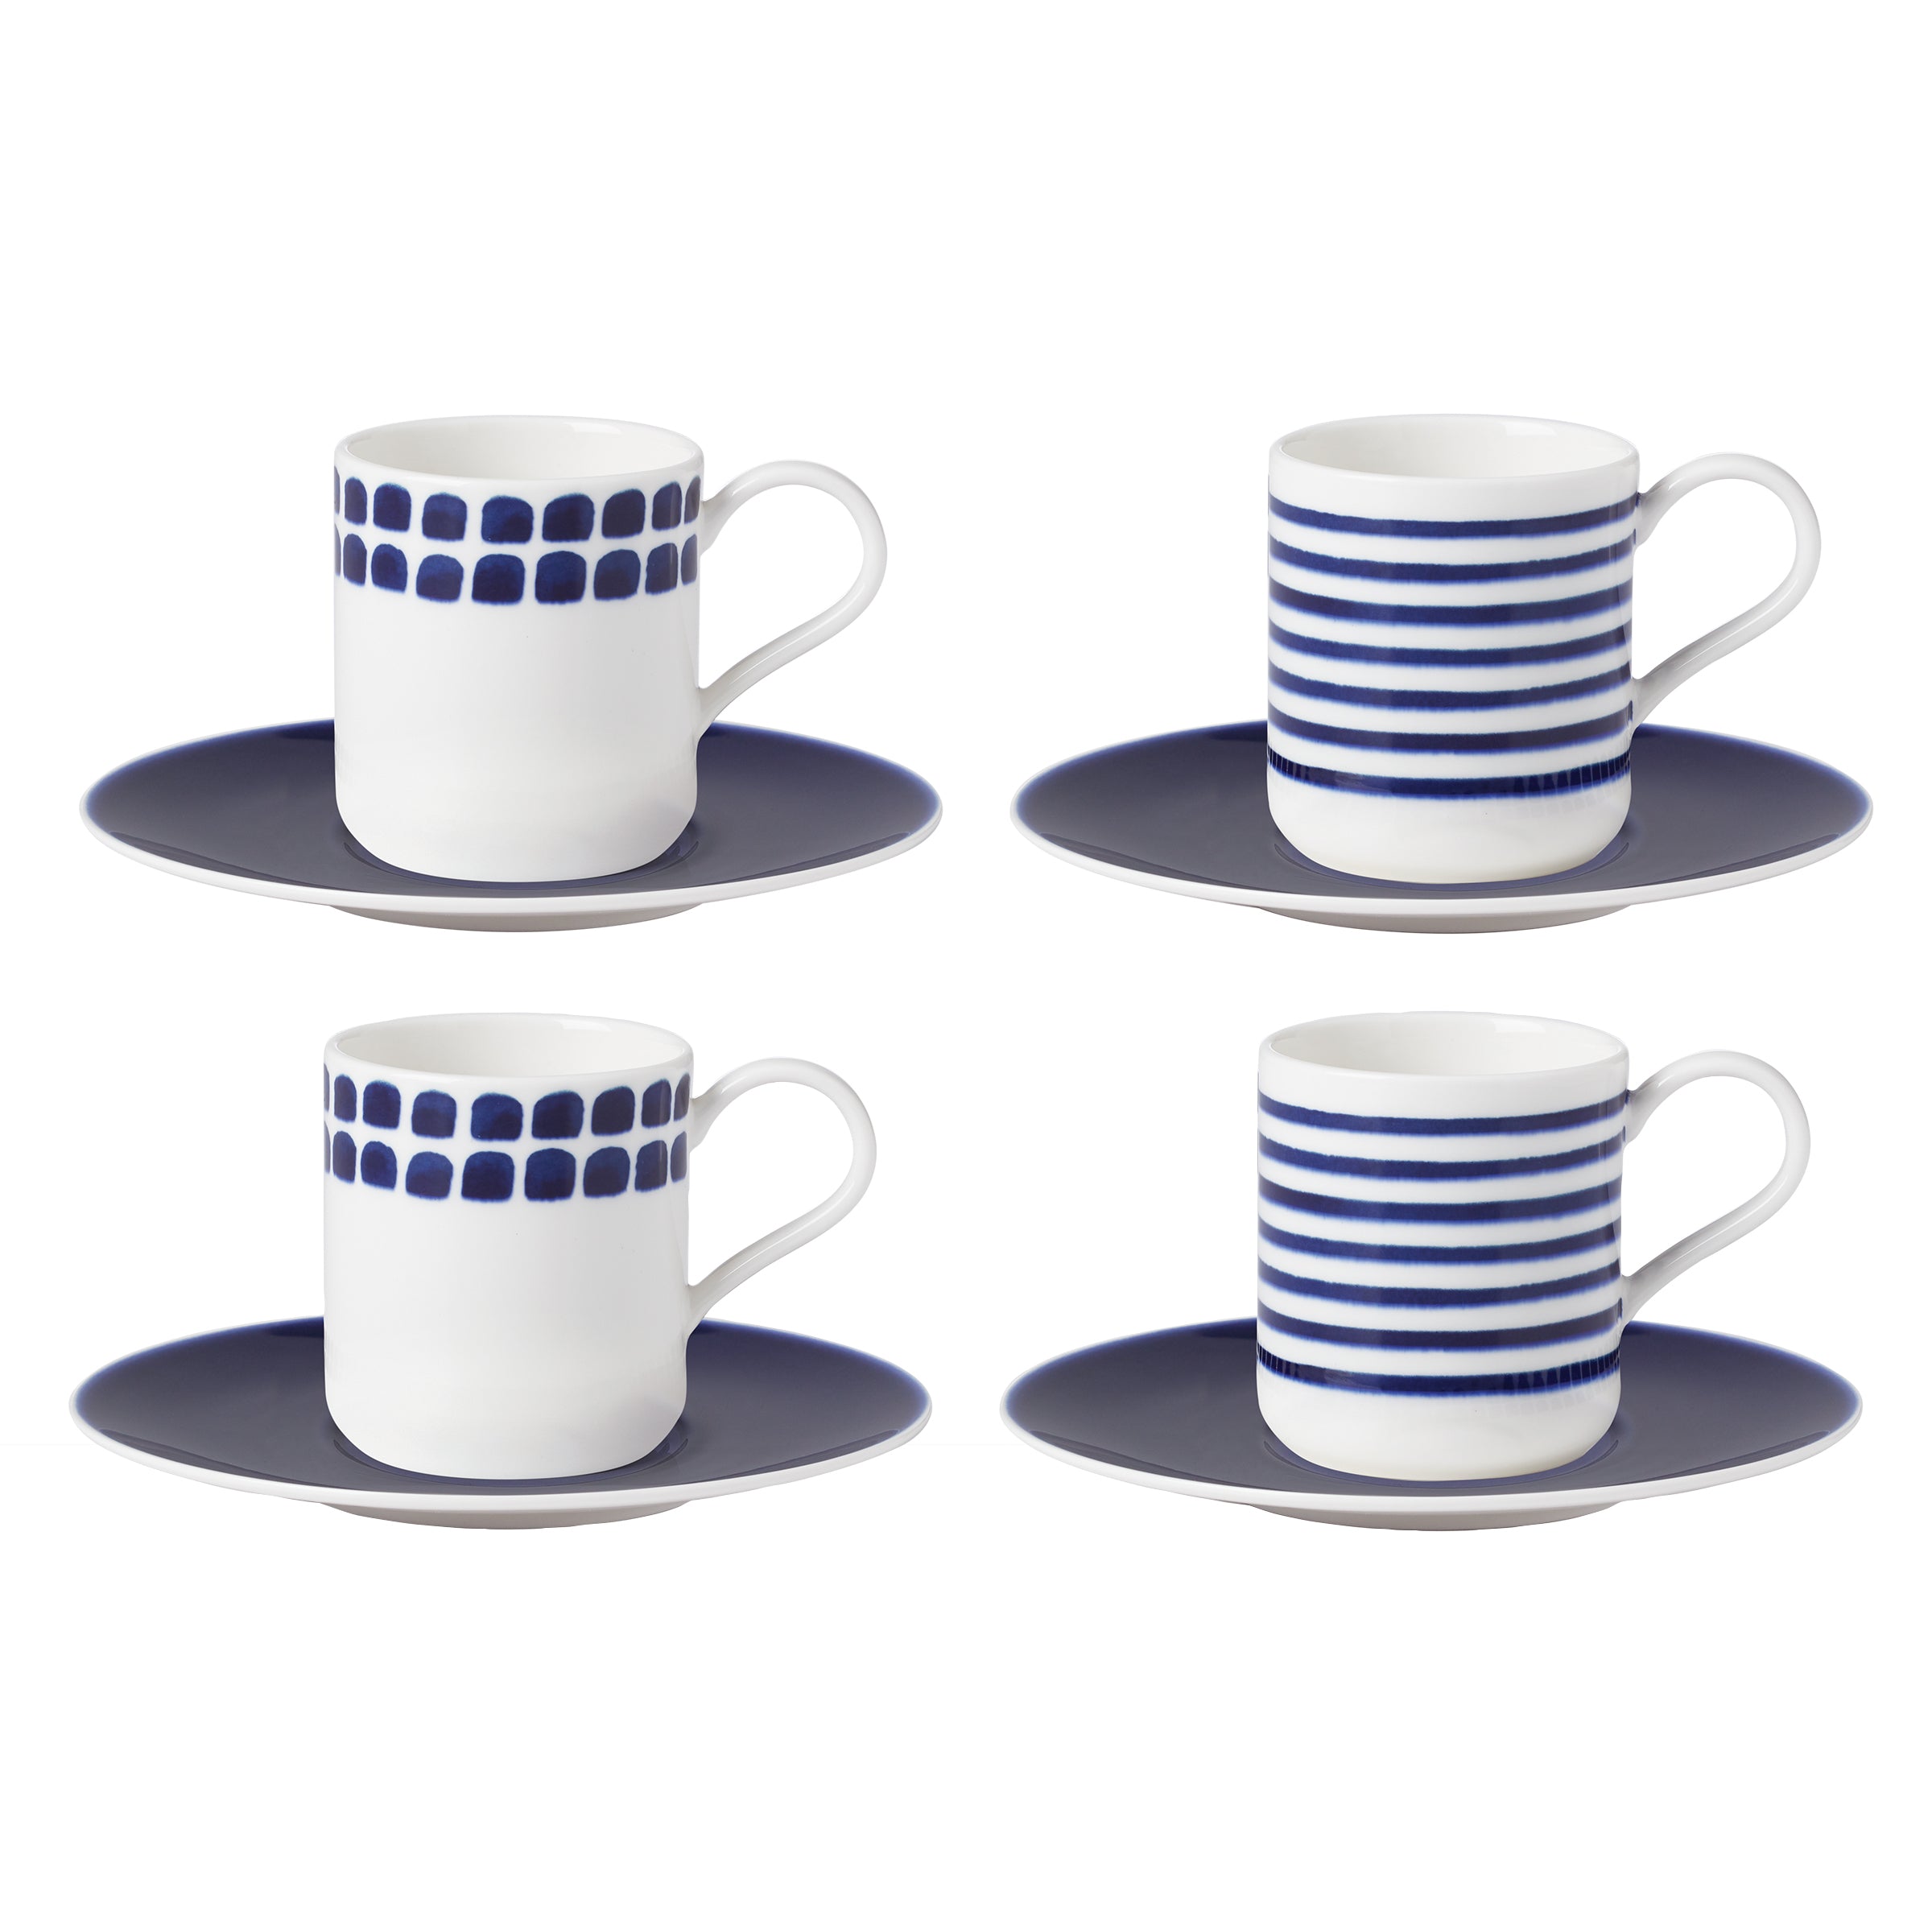 Underground London Espresso Porcelain Cups Set of 4 Trooping the Colour.  Trafalgar Square, St.james Park, Charing Cross. 